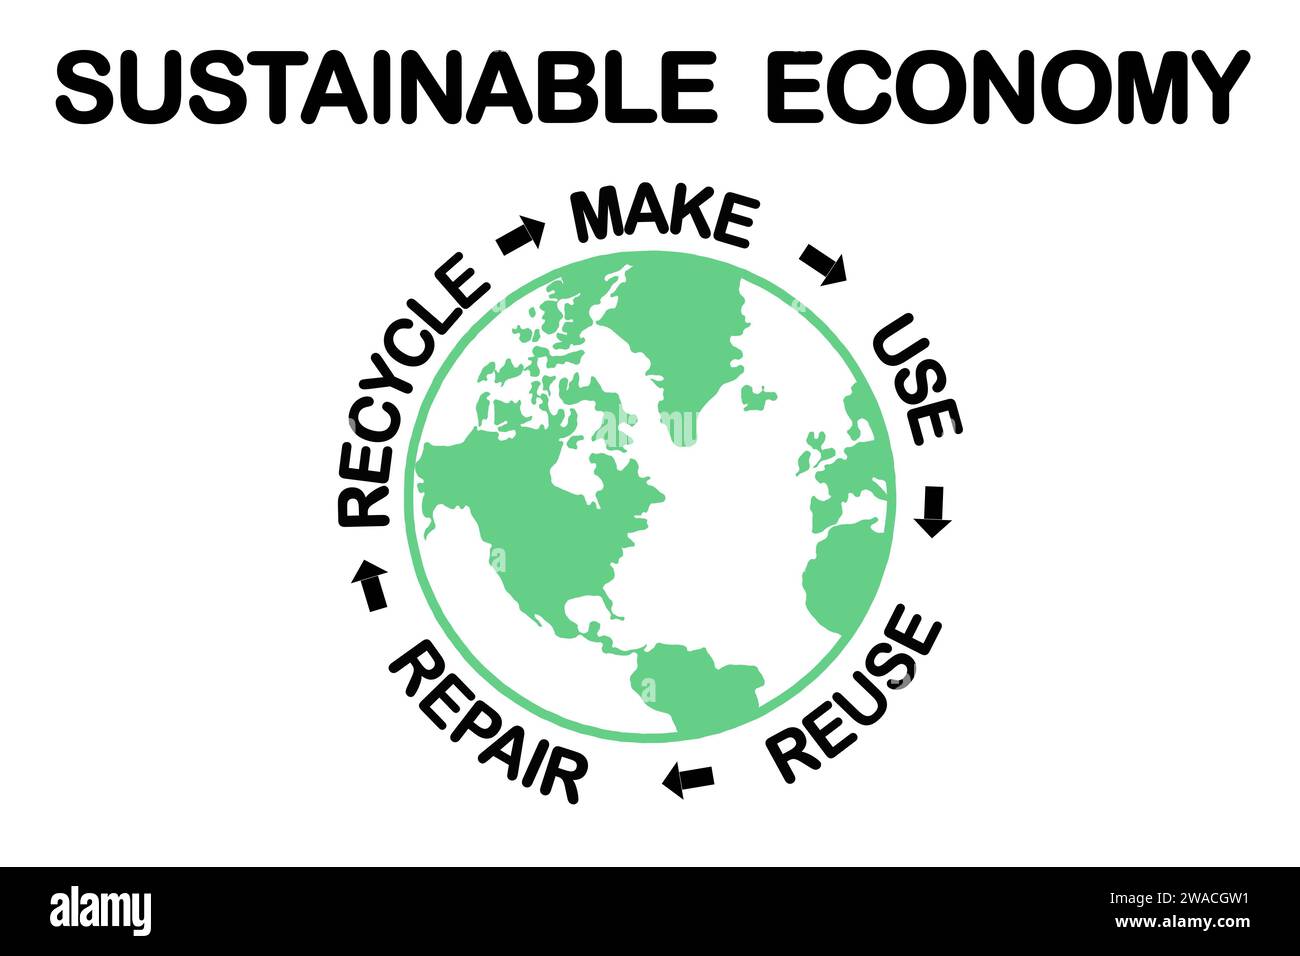 Sustainable circular economy diagram, make, use, reuse, repair, recycle resources for sustainable consumption, zero waste eco concept Stock Photo